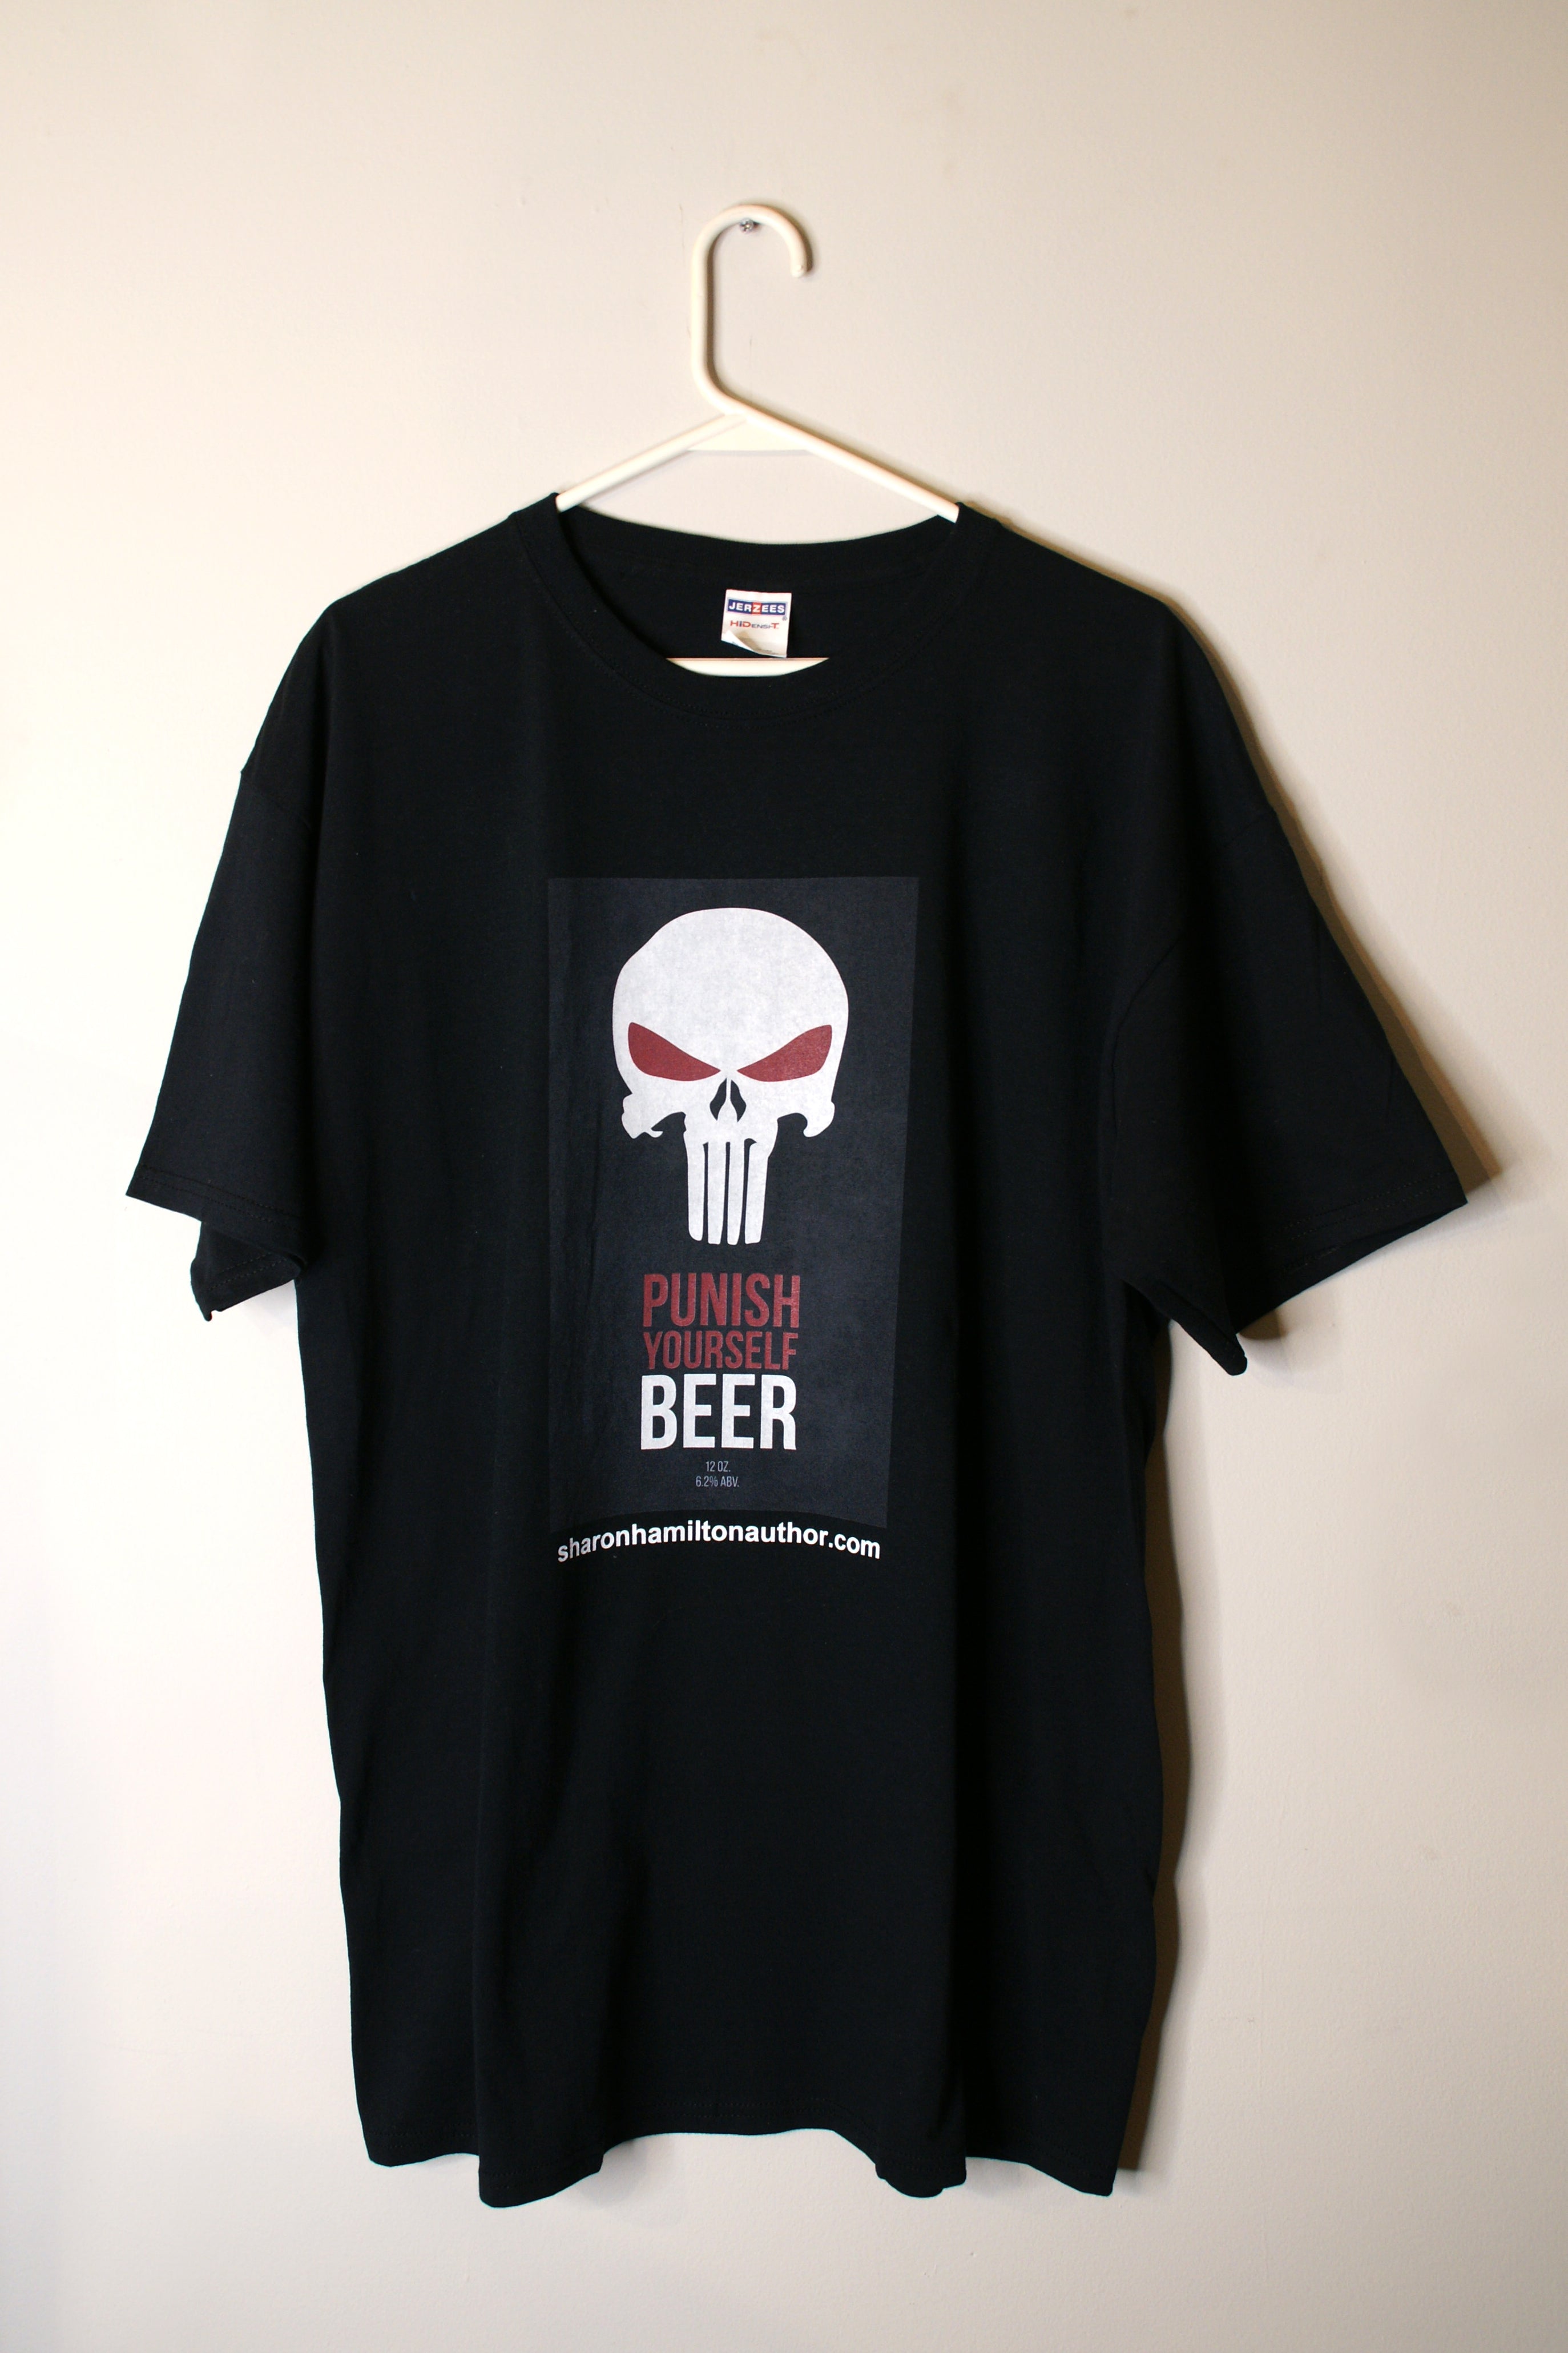 Punish Yourself Beer T-Shirt